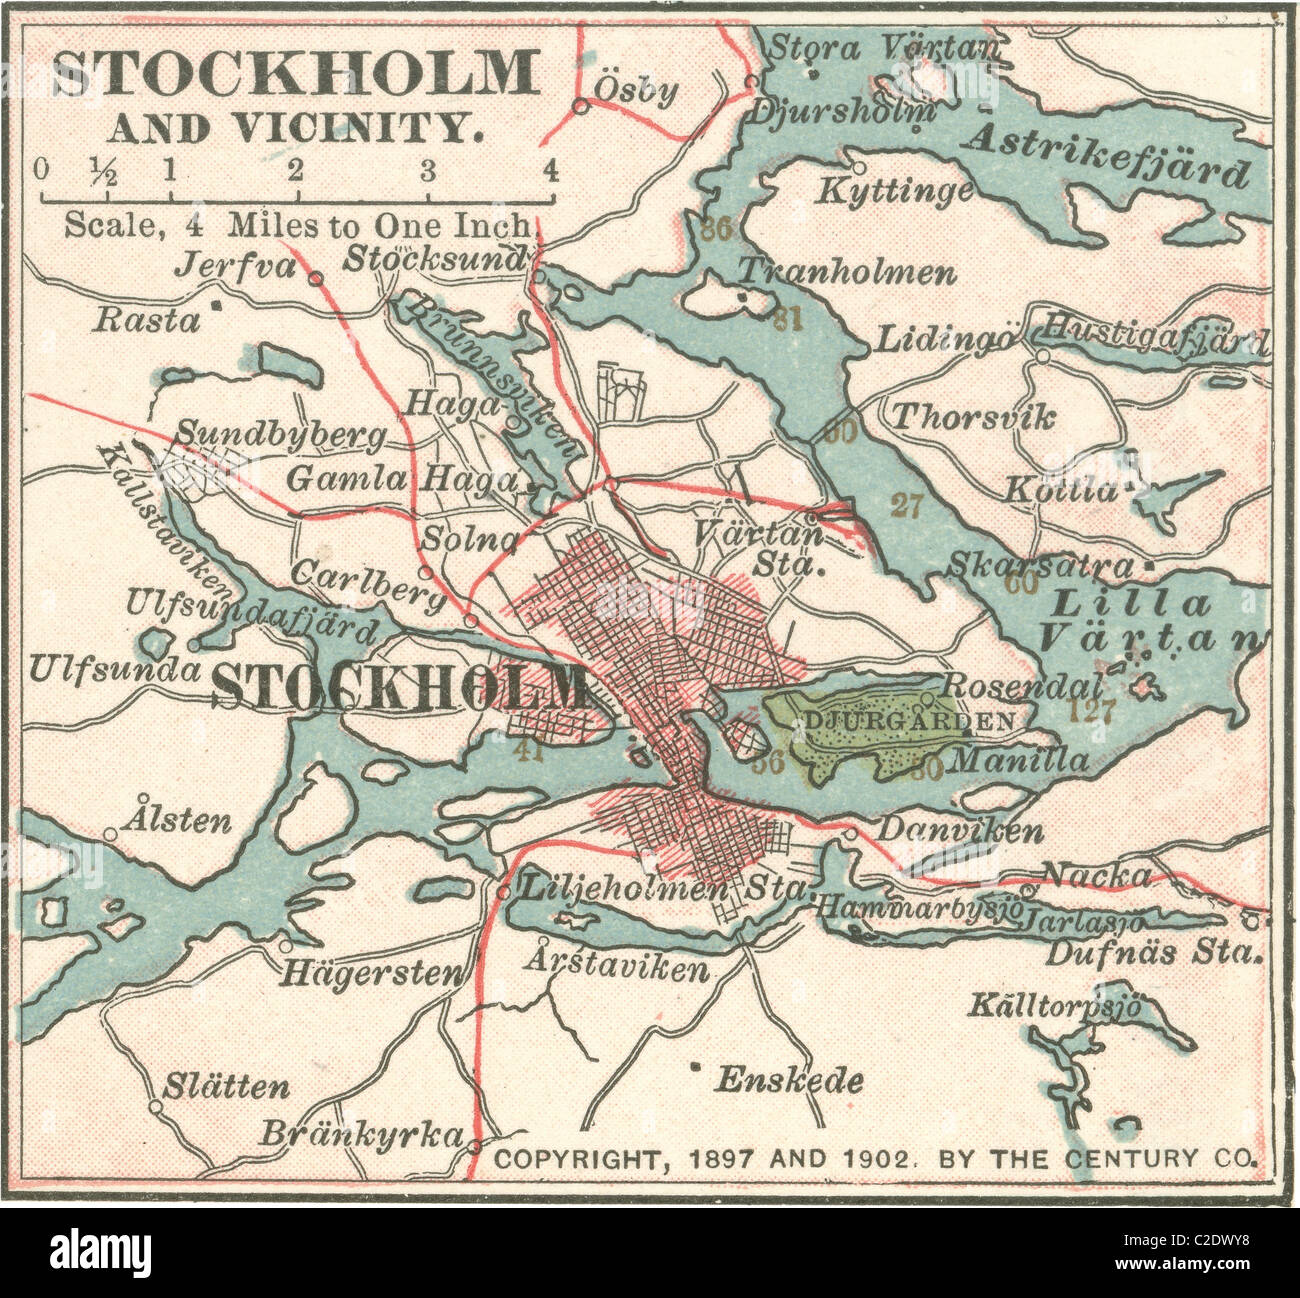 Map of Stockholm Stock Photo